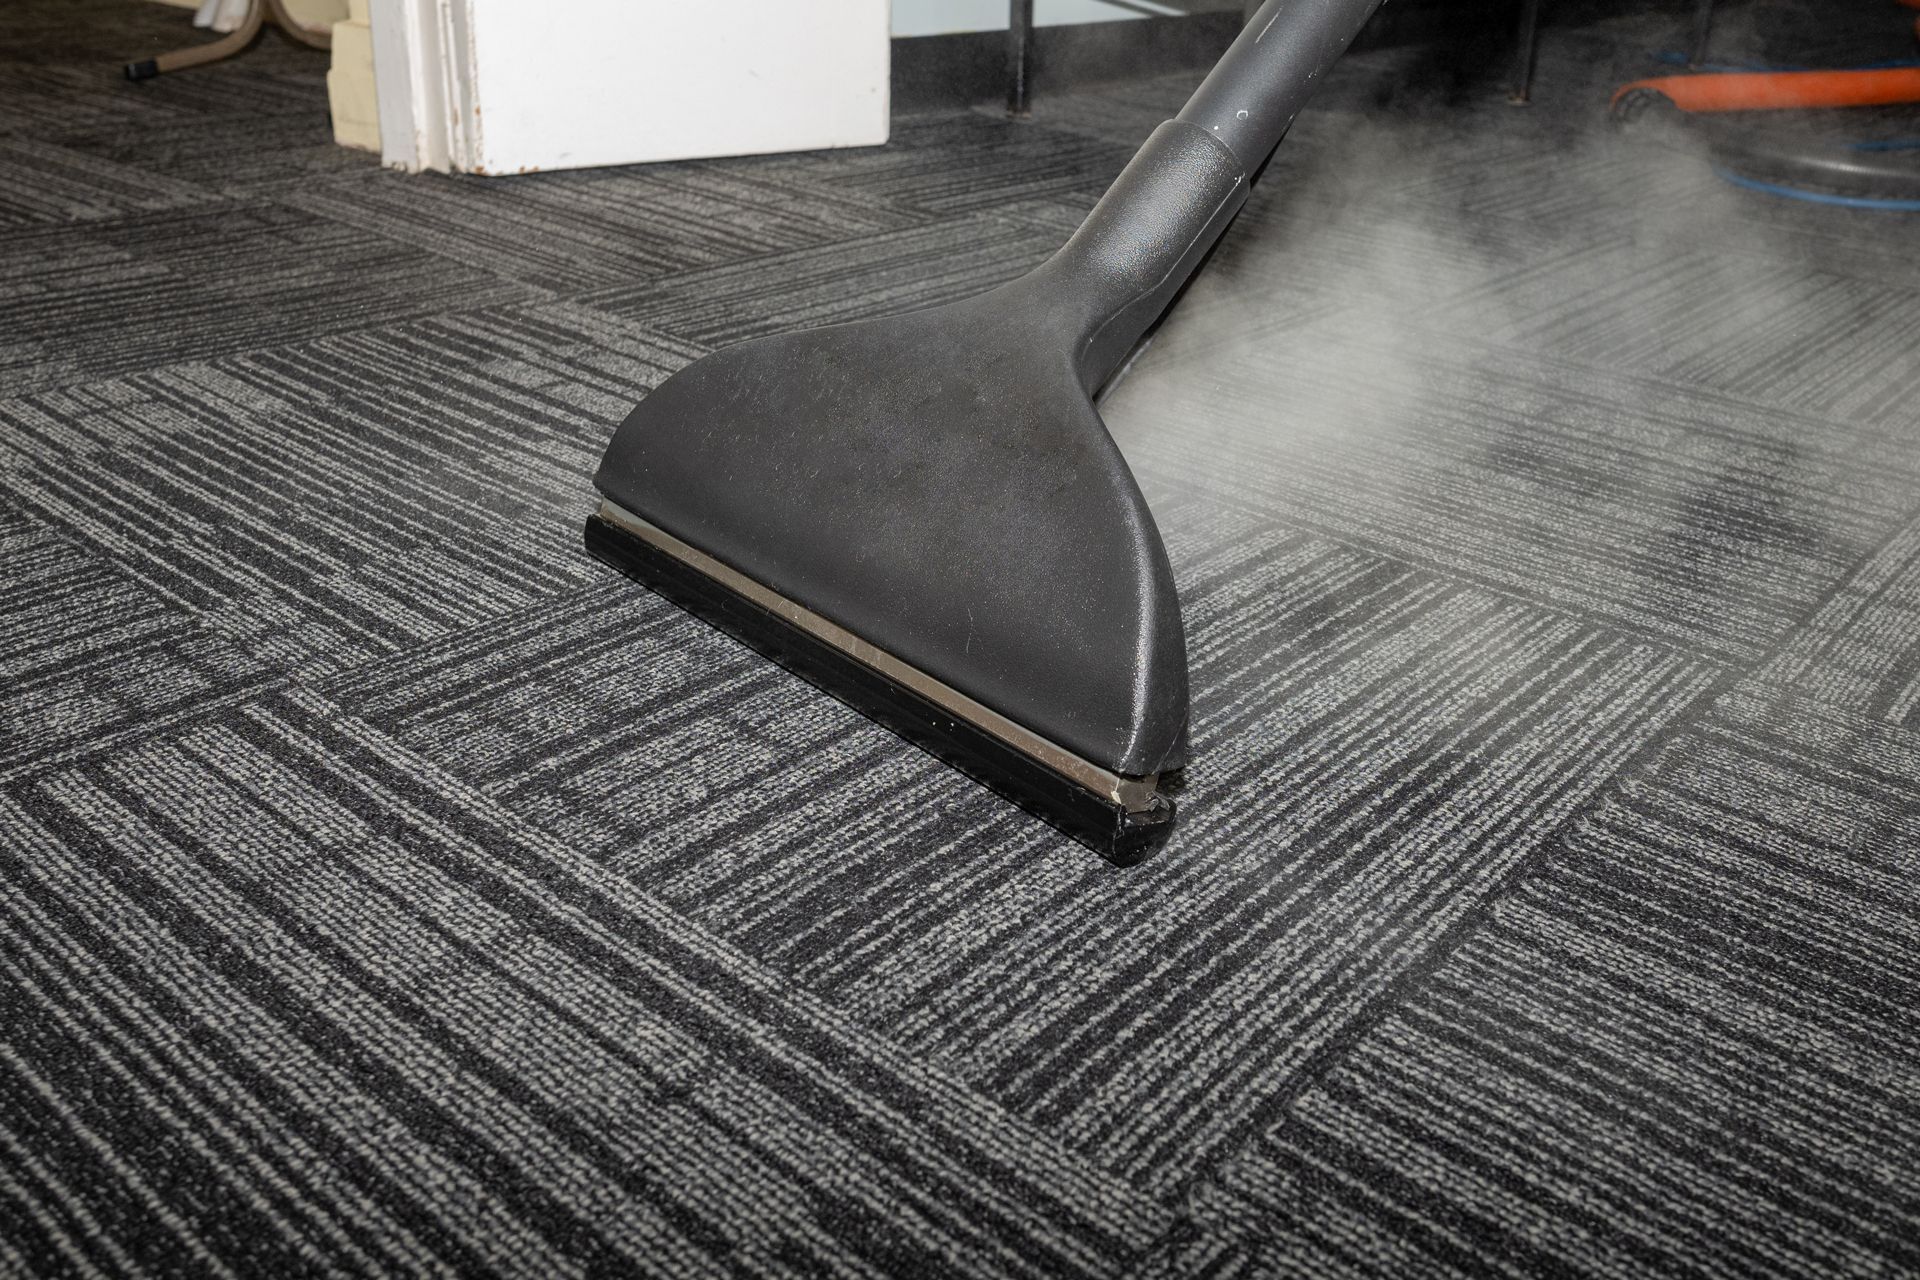 a vacuum cleaner is cleaning a carpet in a room